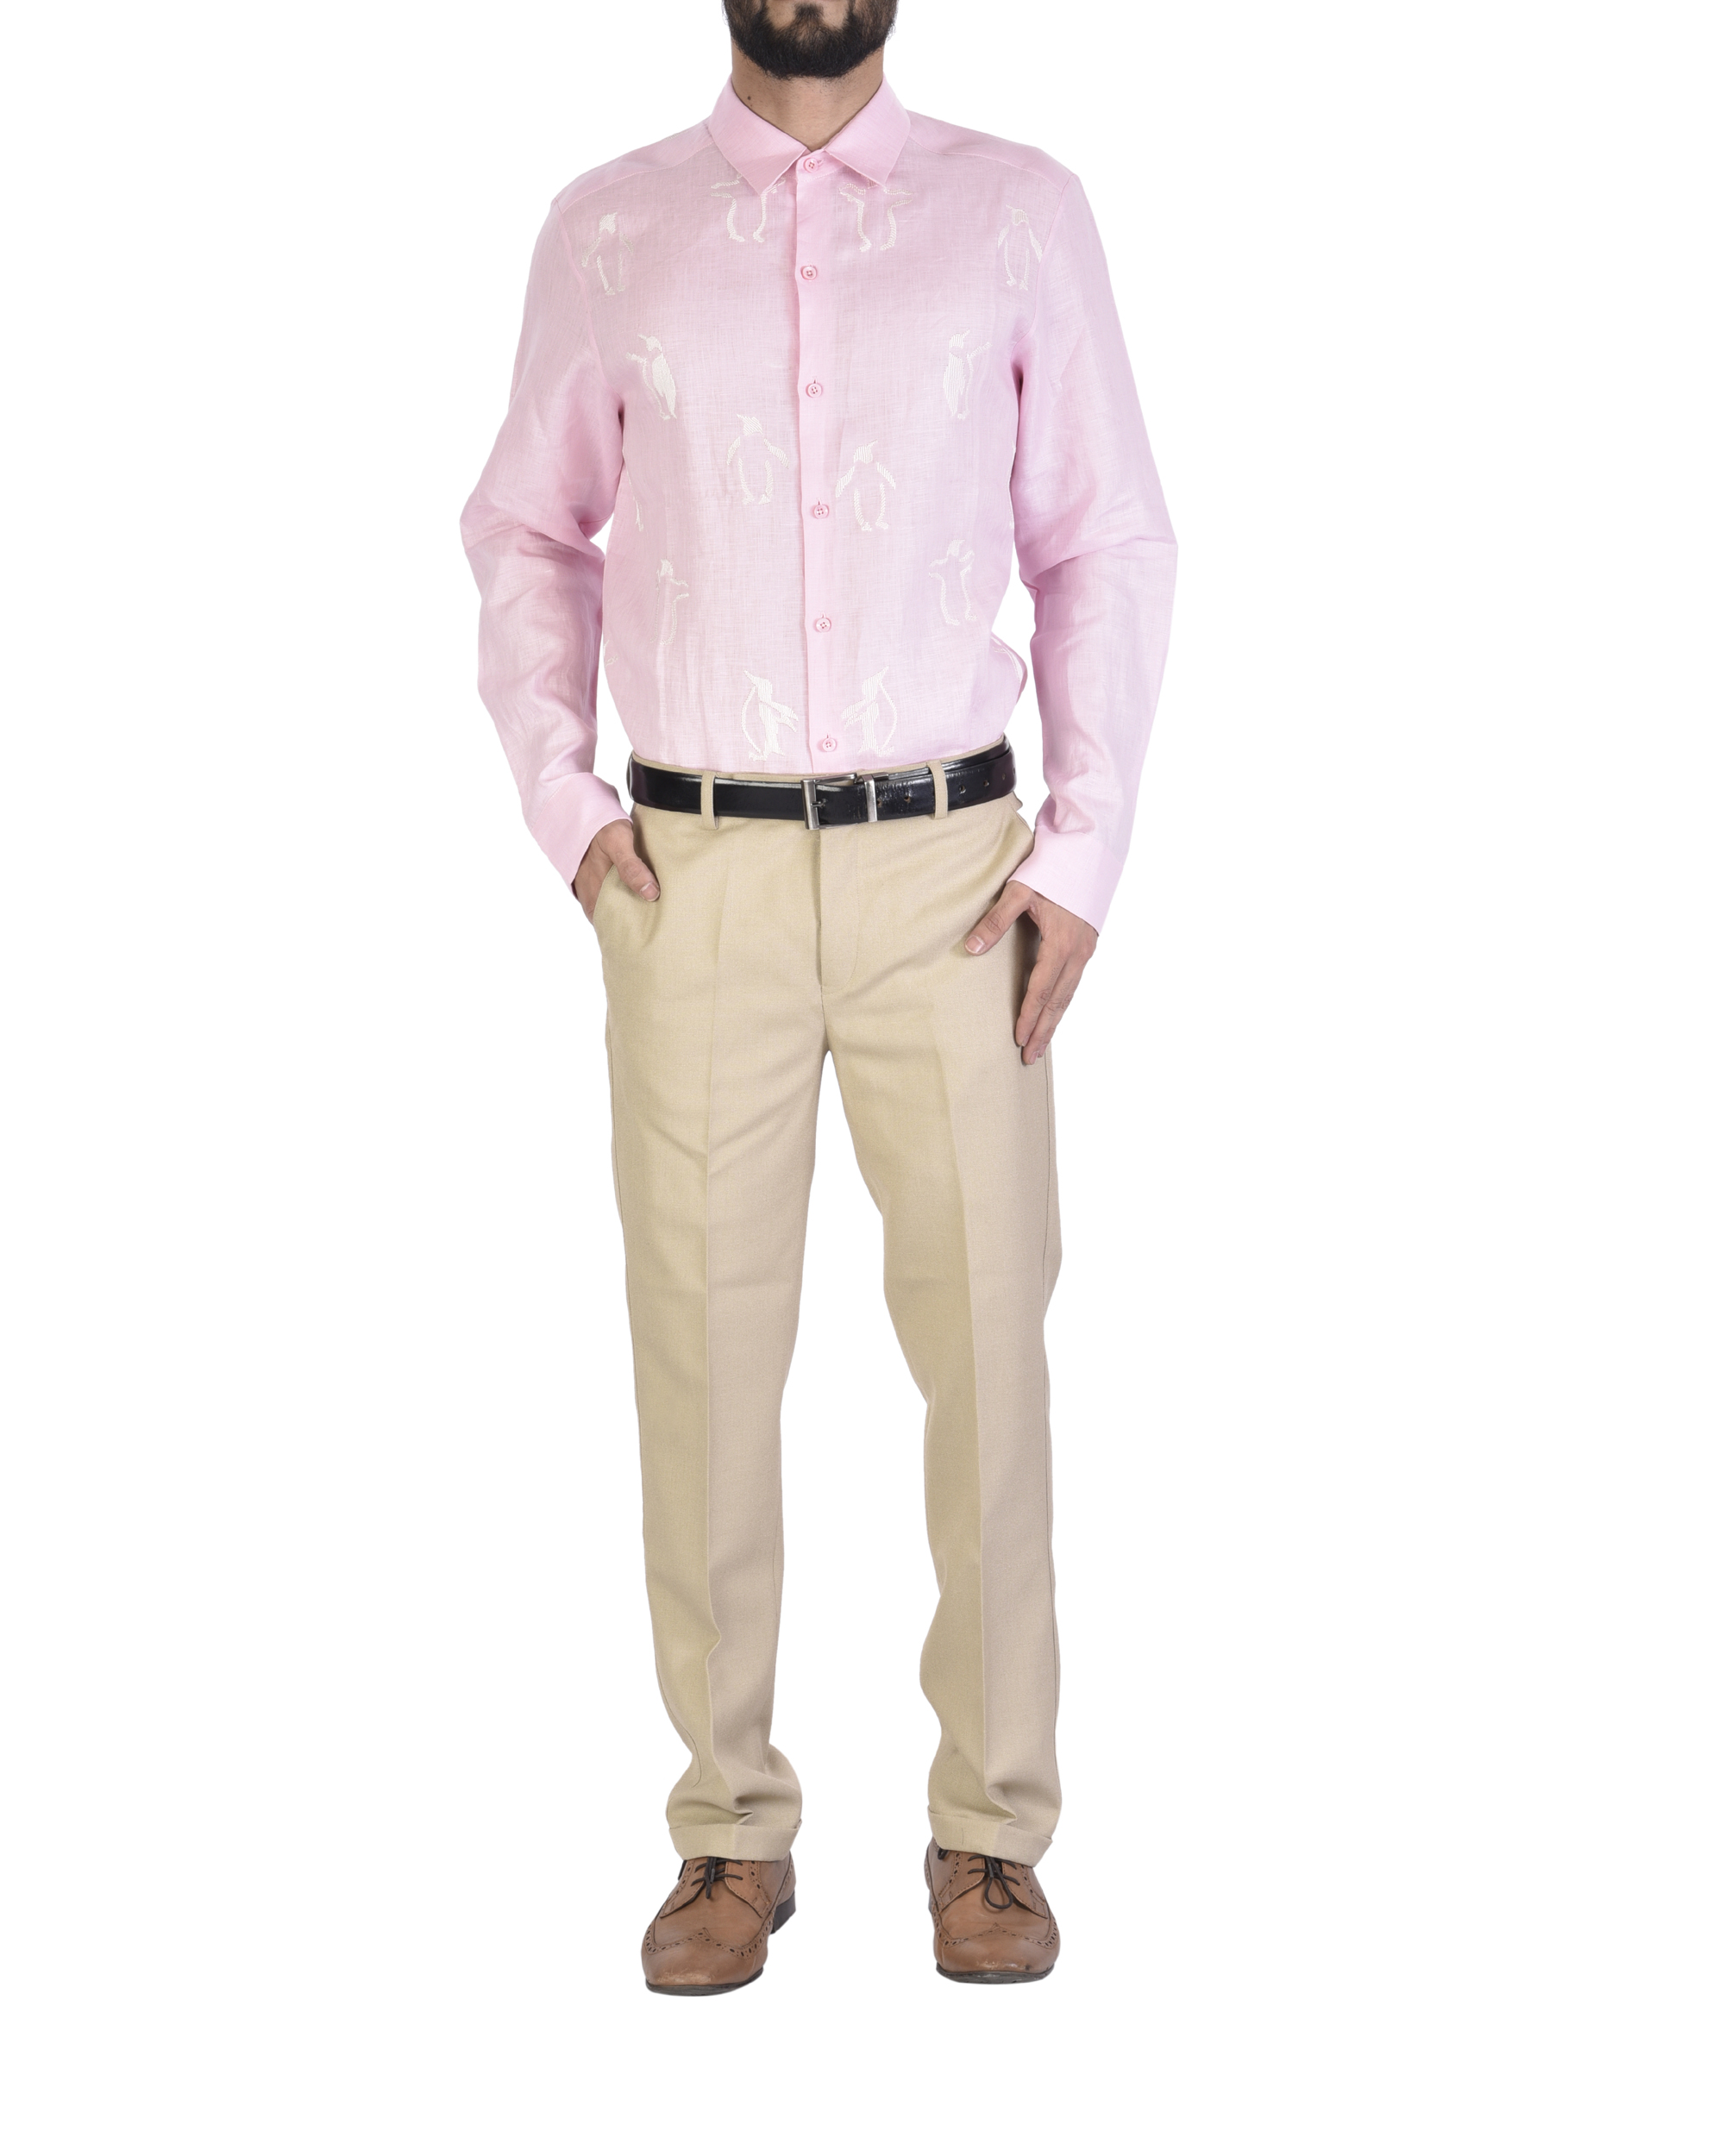 Best pants to wear with pink shirt  Pink Shirt Matching Pants  TiptopGents